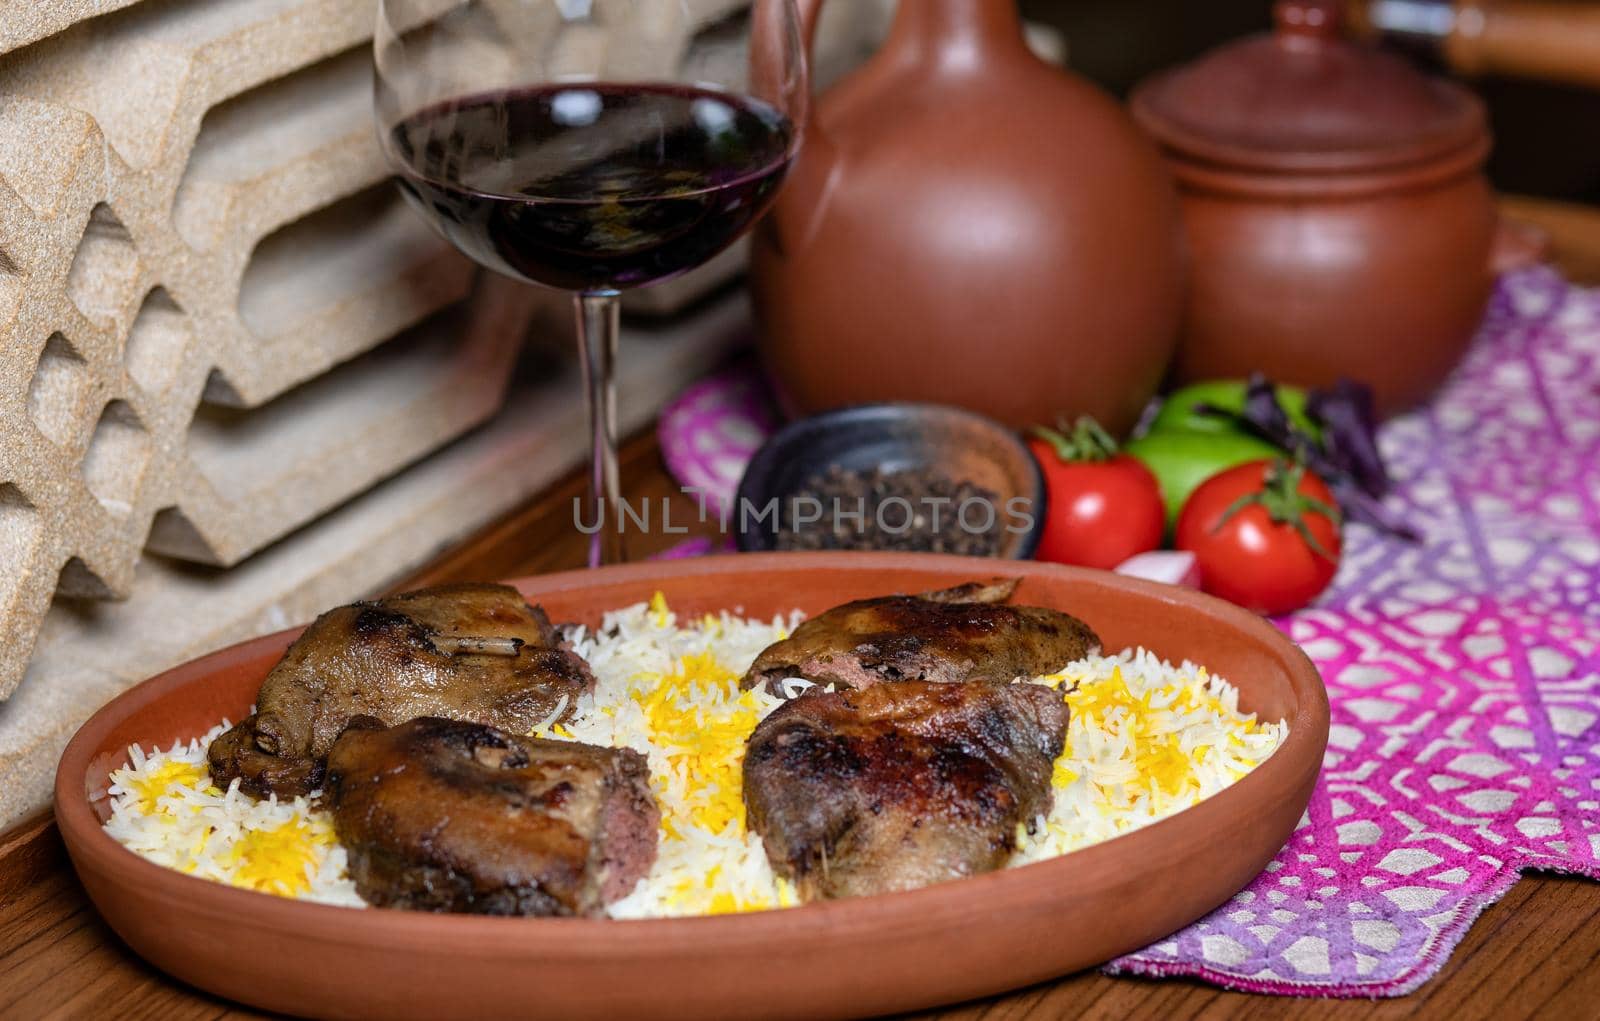 Grilled coot on the rice with red wine glass